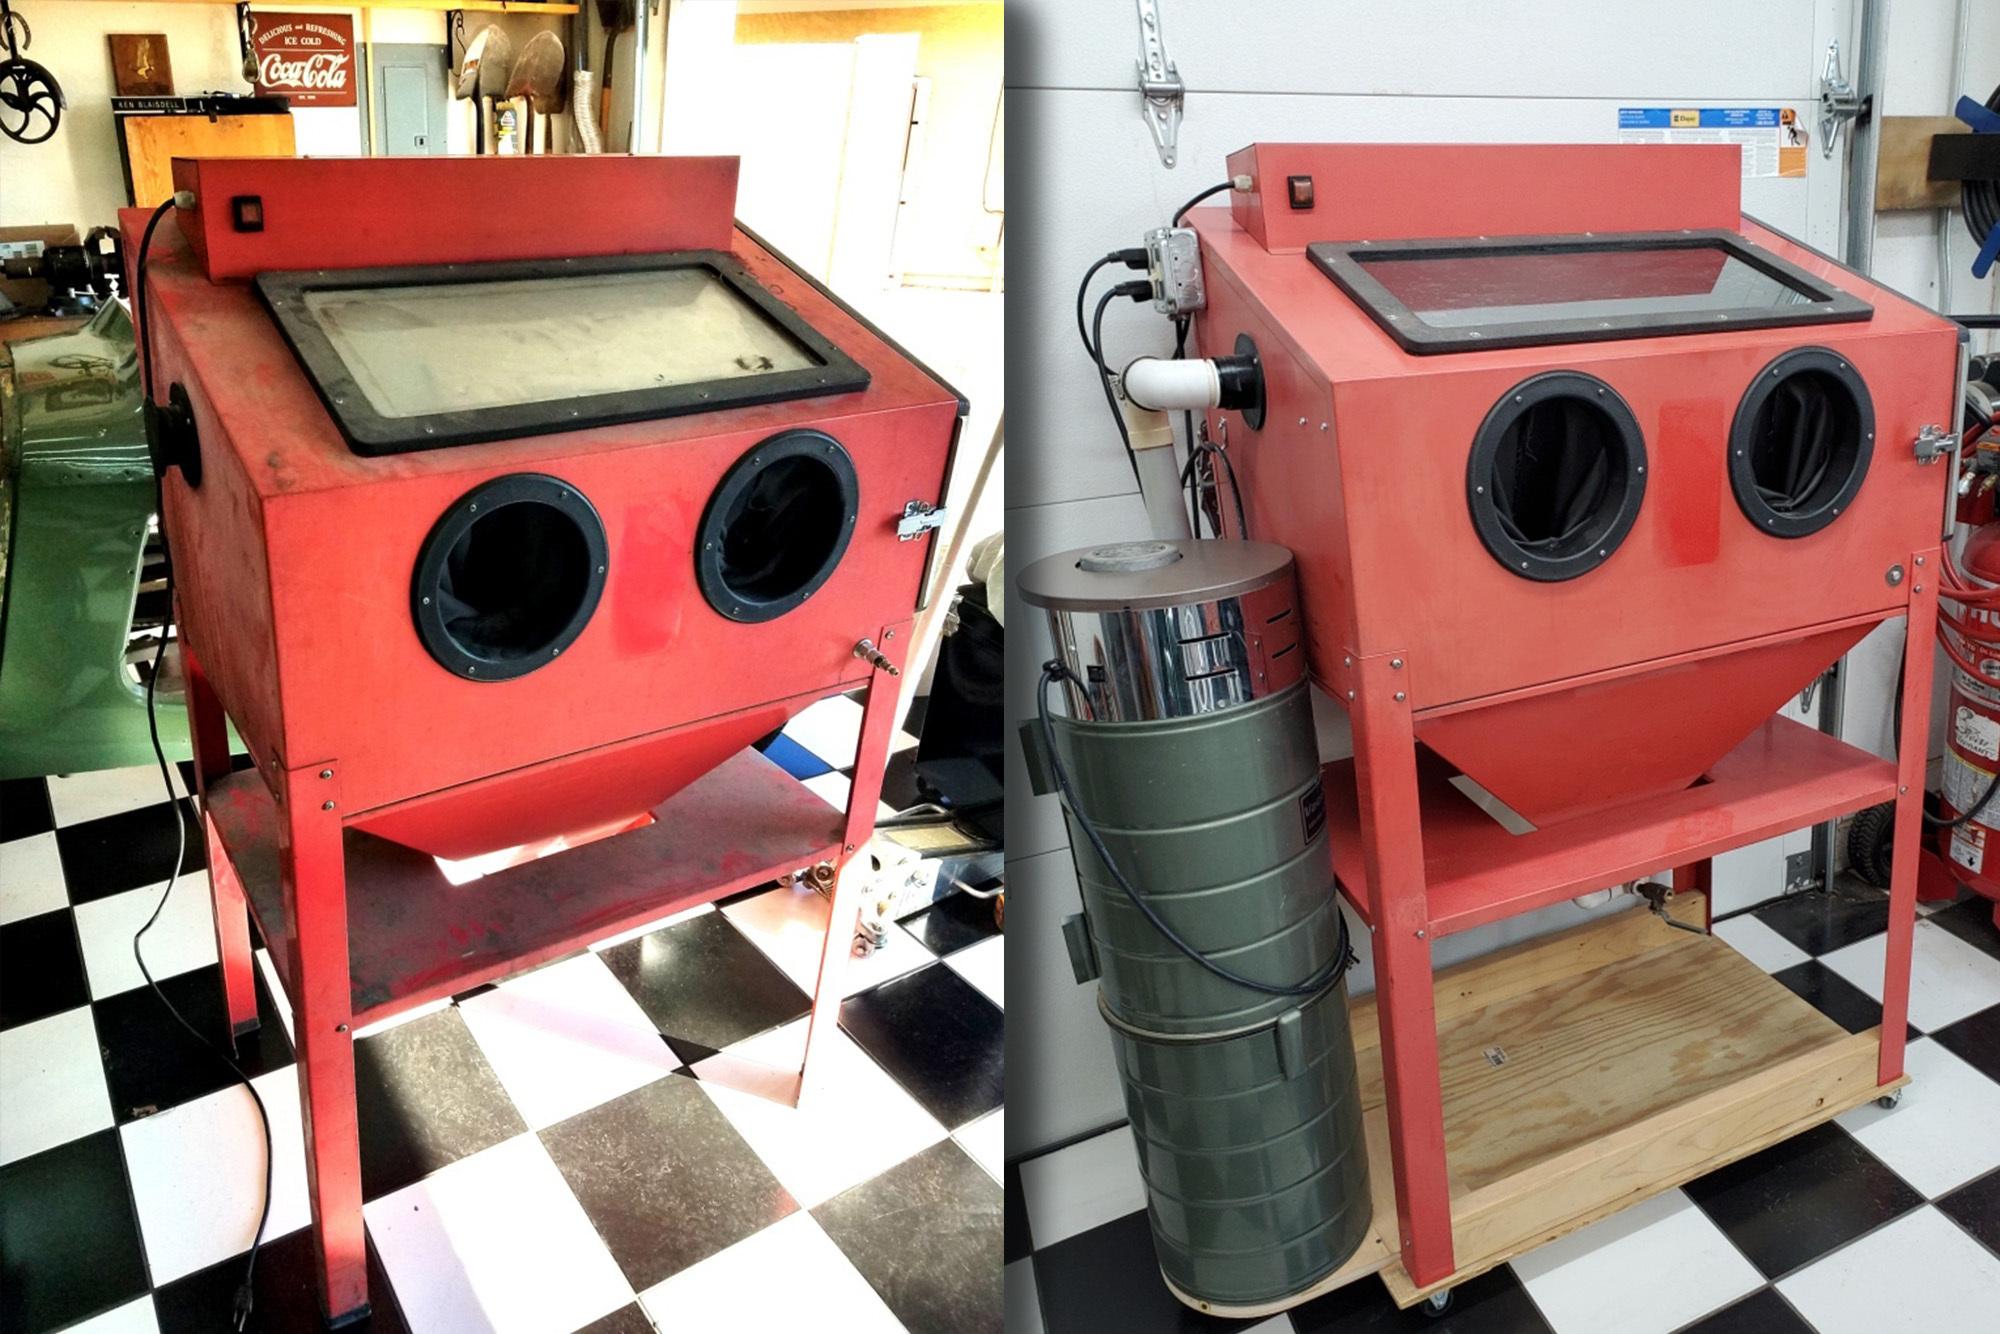 How to get the most out of a $40 used sandblasting cabinet